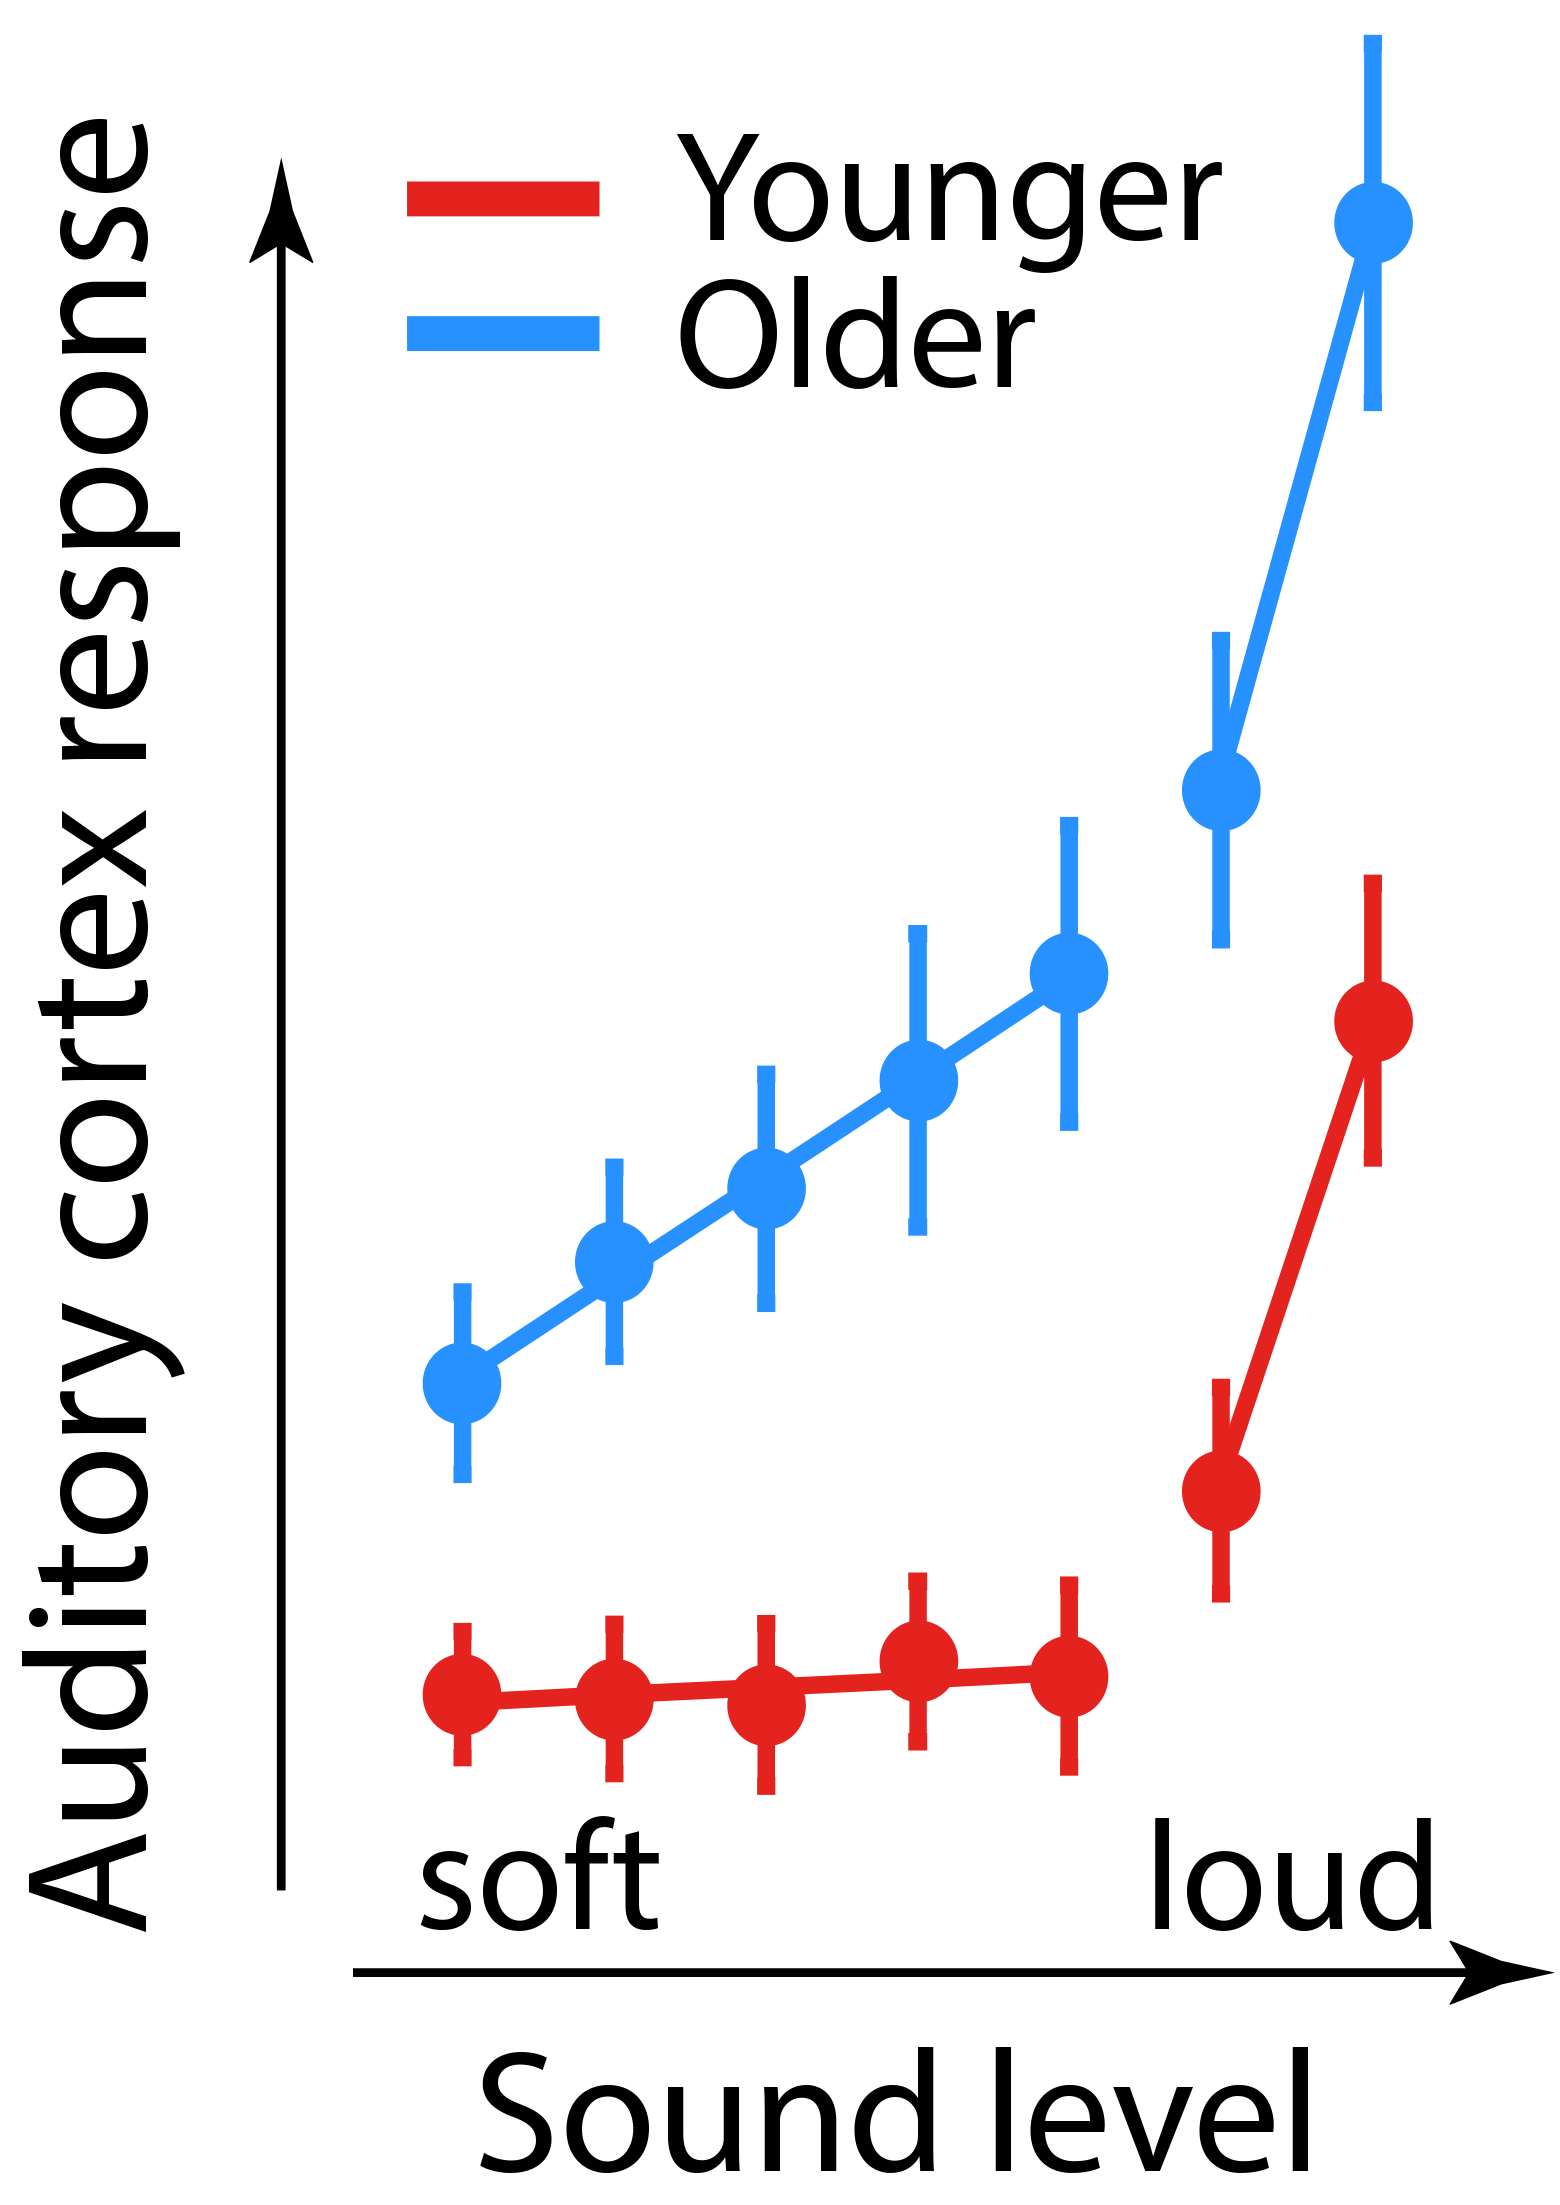 The findings the study are plotted on a line graph. 'Sound level' is on the x-axis and the 'Auditory Cortex Response' is on the y-axis. There are four lines on the graph: 2 in blue indicating older people and 2 in red indicating younger people. The lines show that young norma-hearing people are sensitive to loud sounds at the cost of missing soft sounds, whereas older people are sensitive to soft and loud sounds.